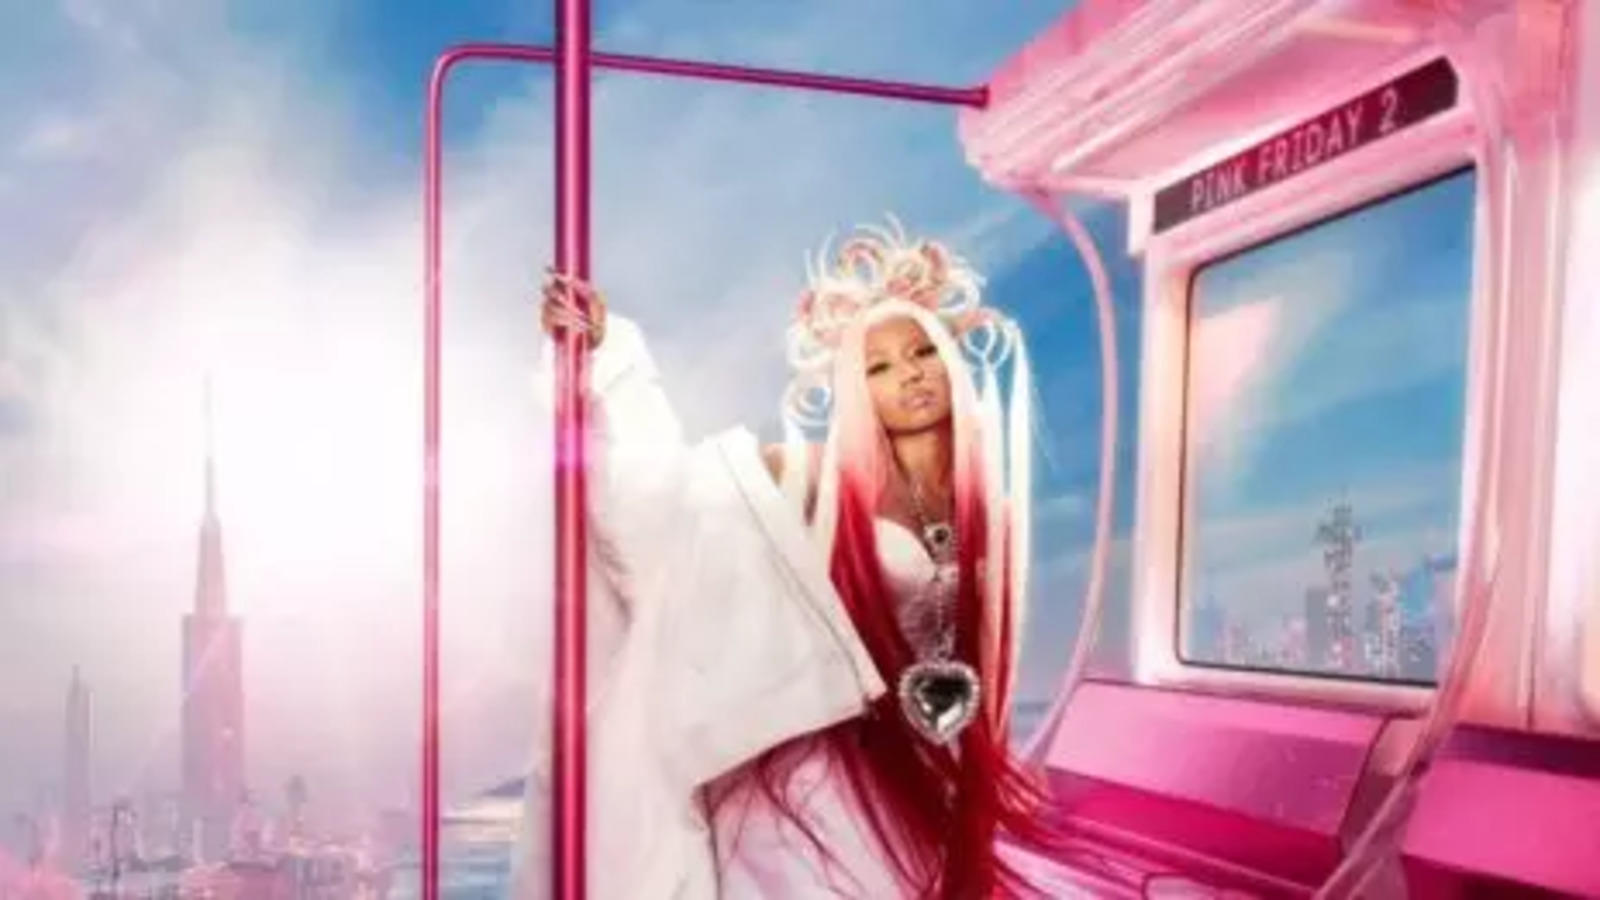 Pink Friday 2: 'Pink Friday 2': Nicki Minaj unveils futuristic cover art for upcoming album. See release date and more